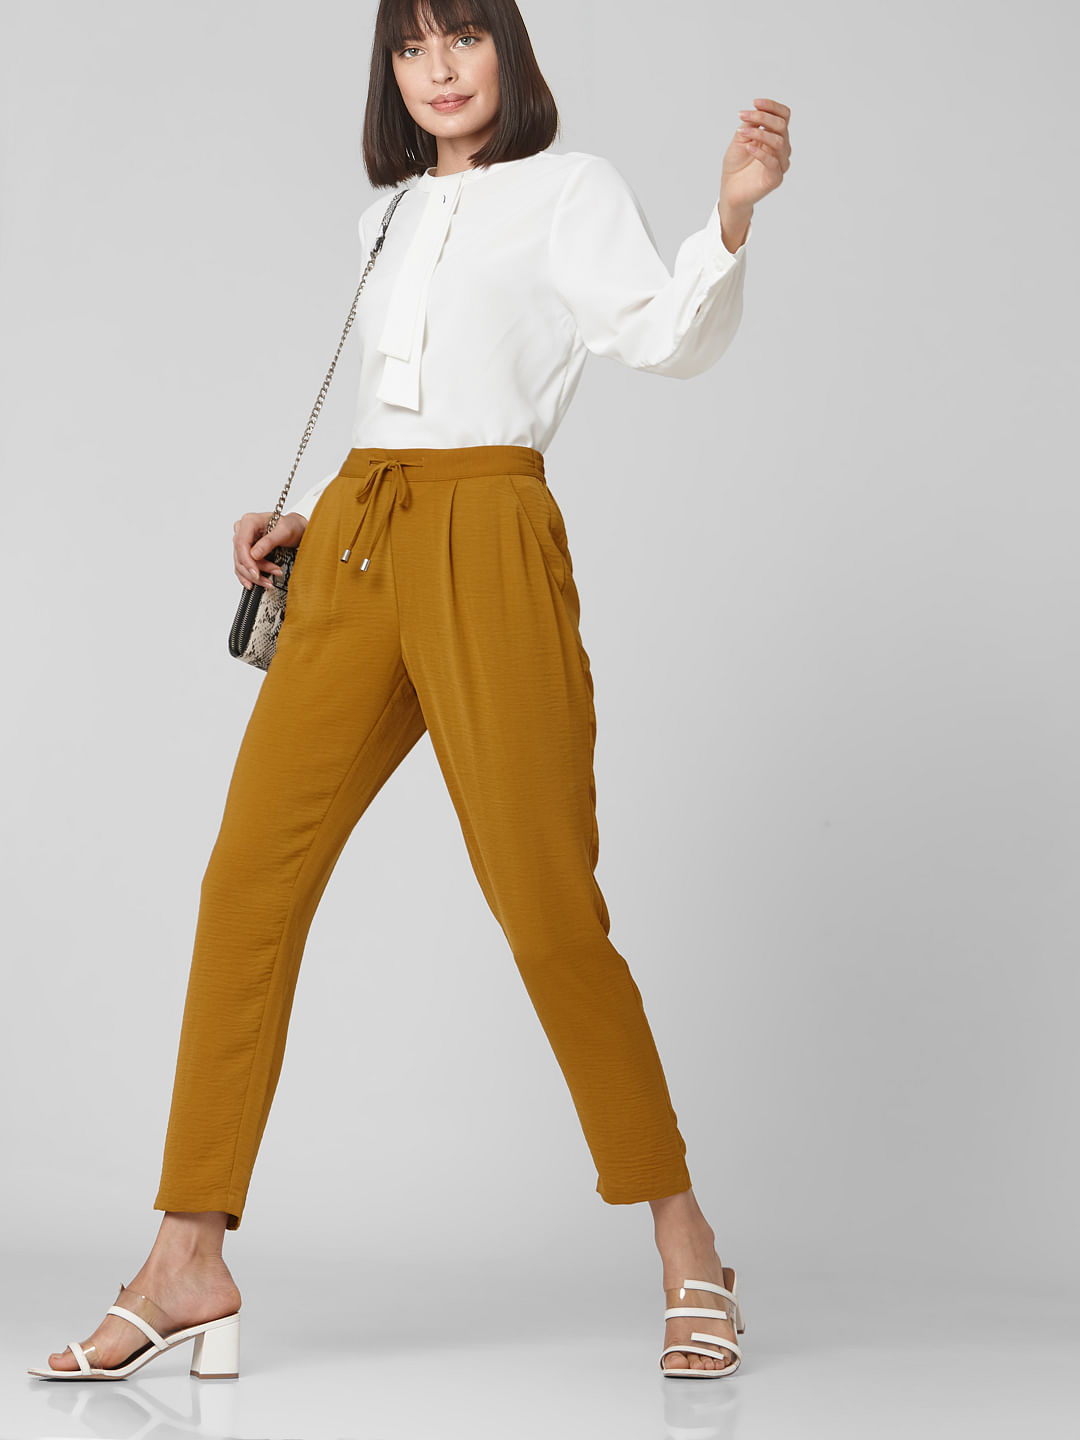 The Cute Elastic Waist Pants You Need To Embrace And No Theyre Not  Sweats  FLEETSTREET